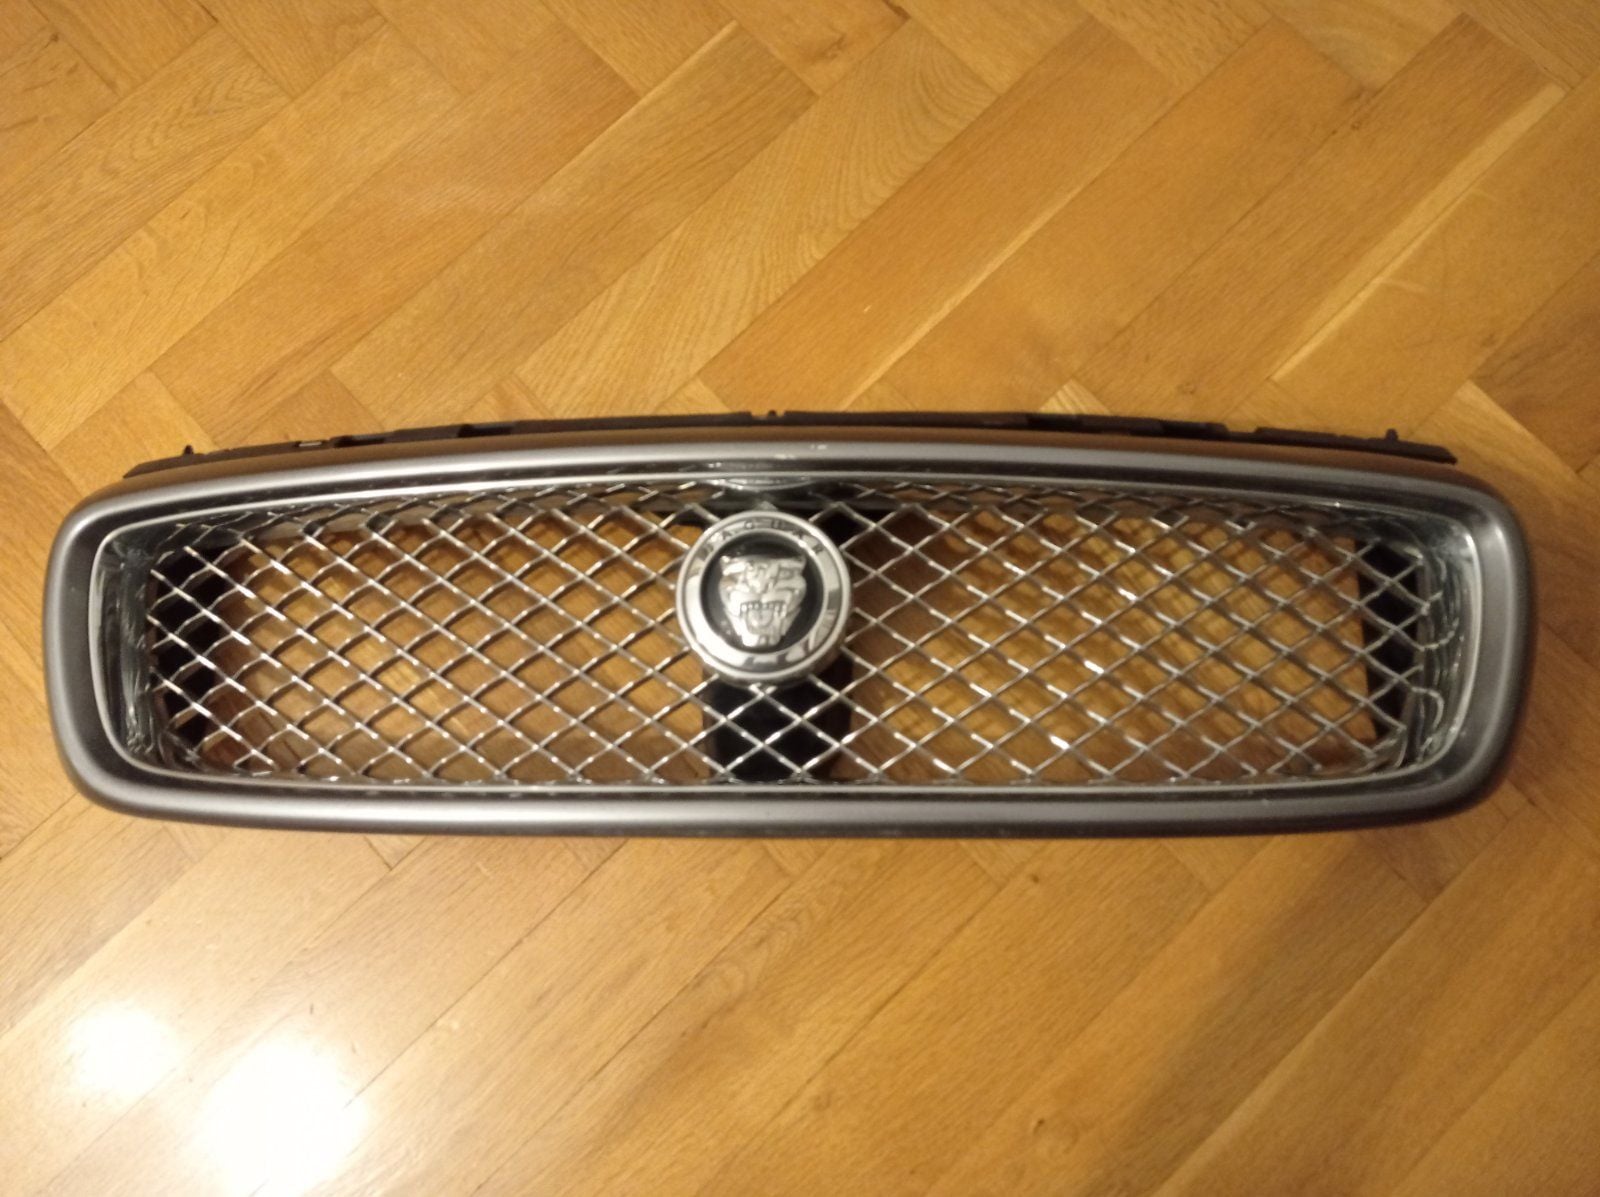 Exterior Body Parts - Jaguar X-type facelift grill - Used - 2001 to 2009 Jaguar X-Type - Bad Iburg, Germany